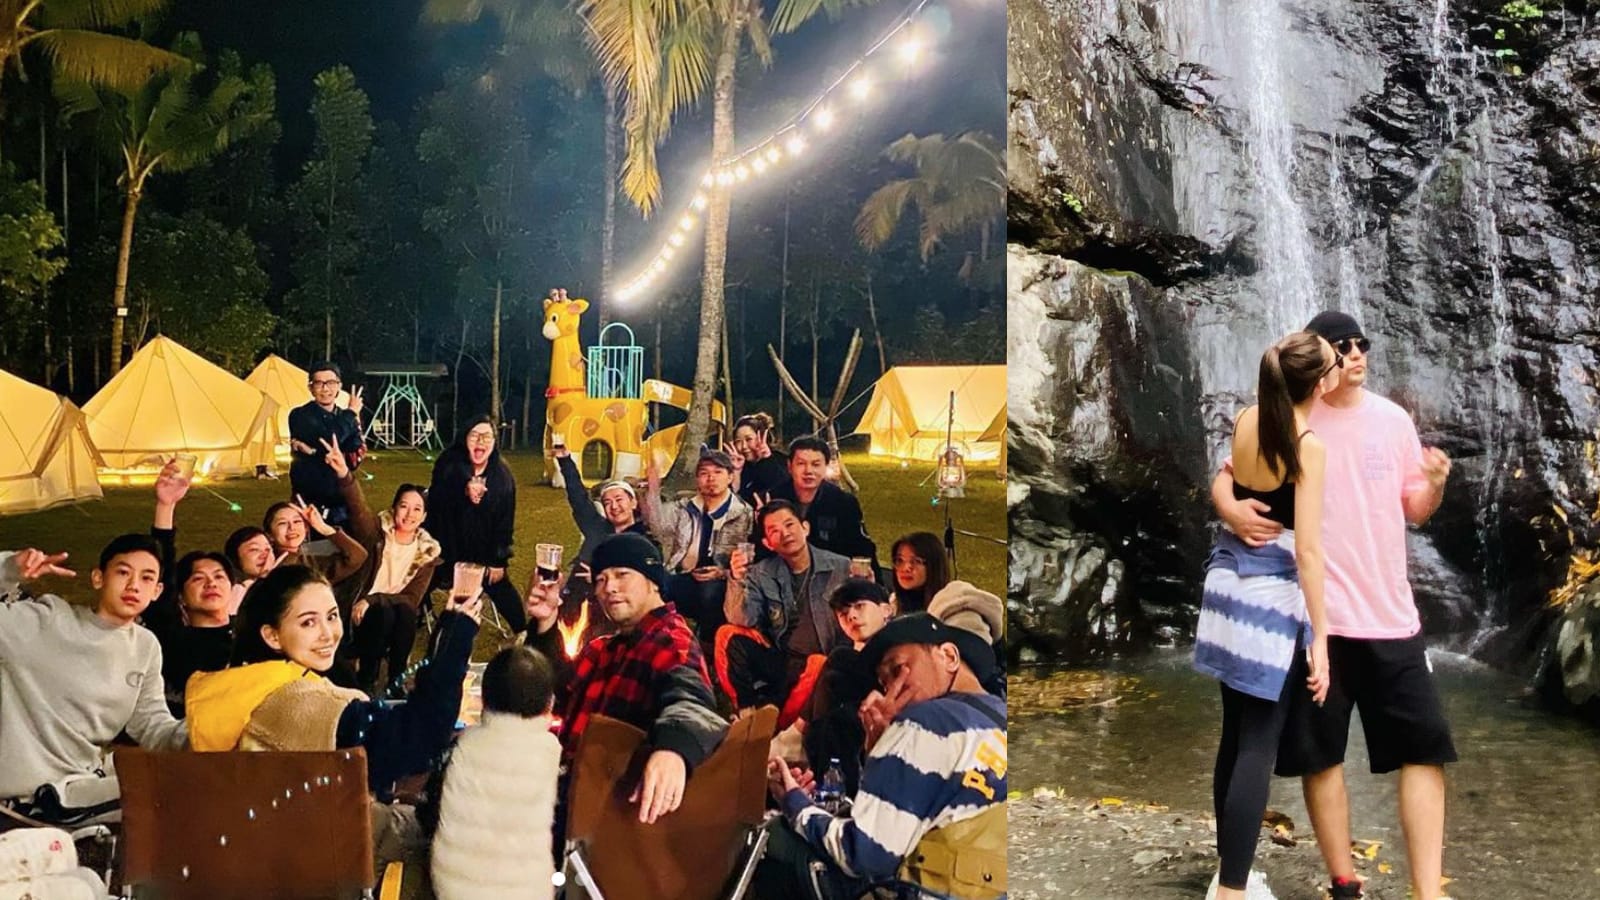 Jay Chou Celebrated His 42nd Birthday By Going Glamping With His Friends